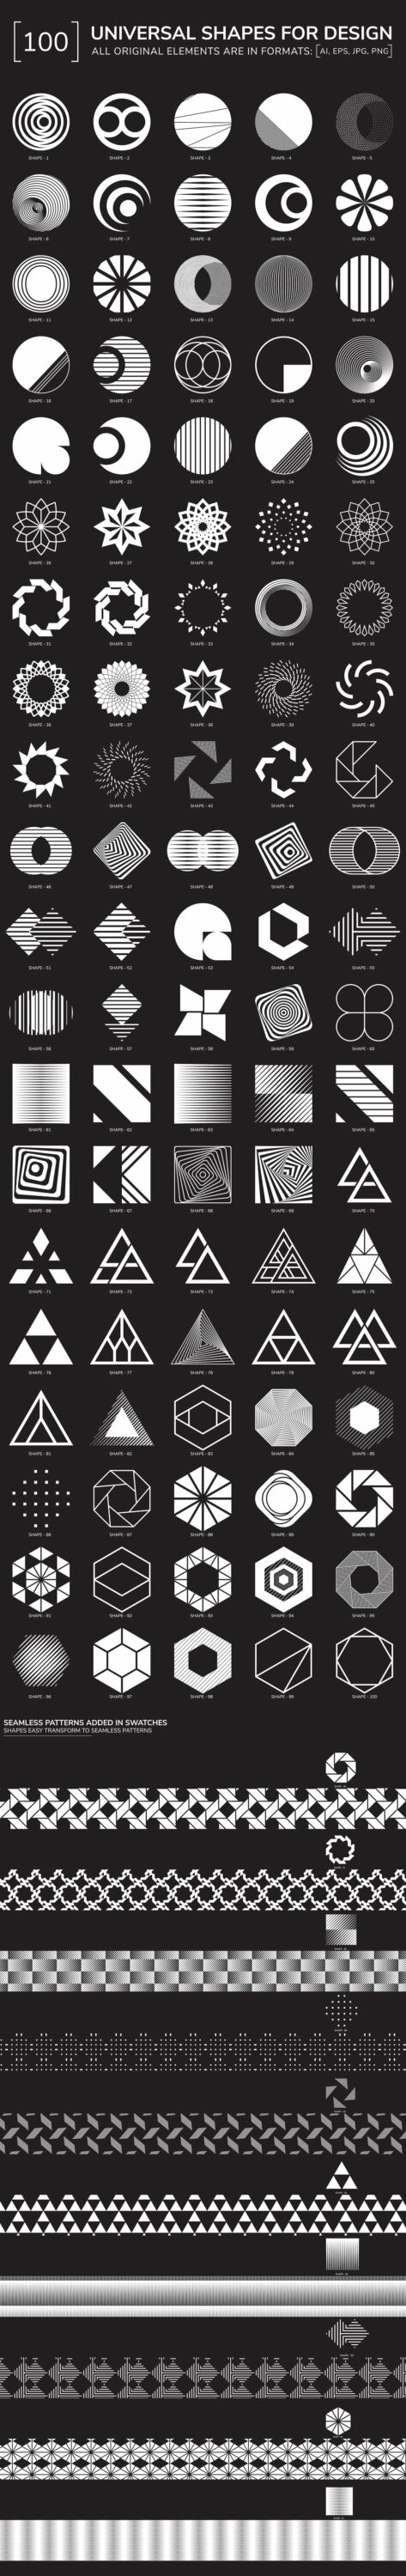 Beautiful black and white drawings of various shapes for any prints.